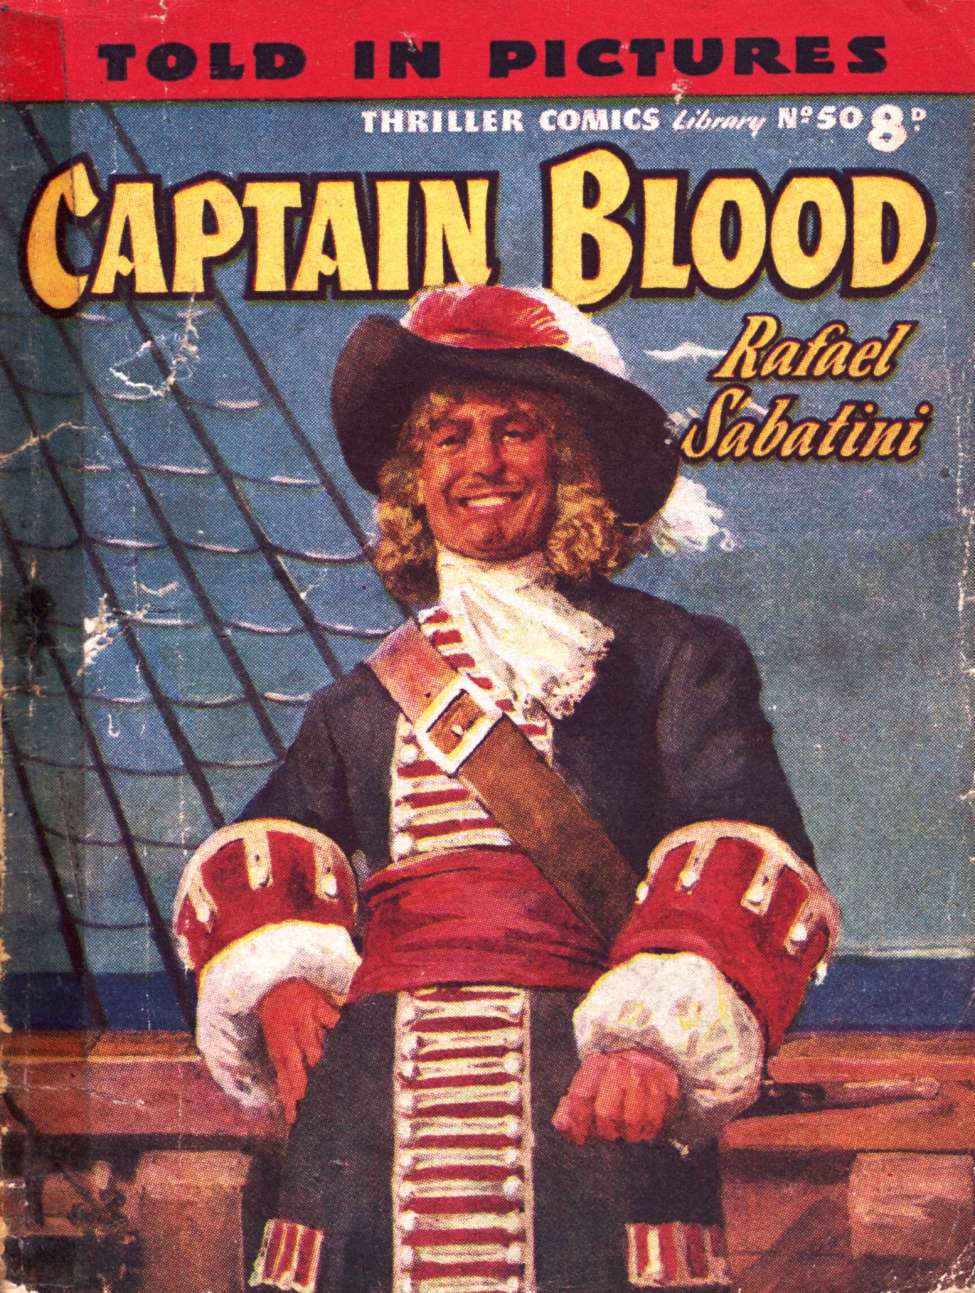 Book Cover For Thriller Comics Library 50 - Captain Blood